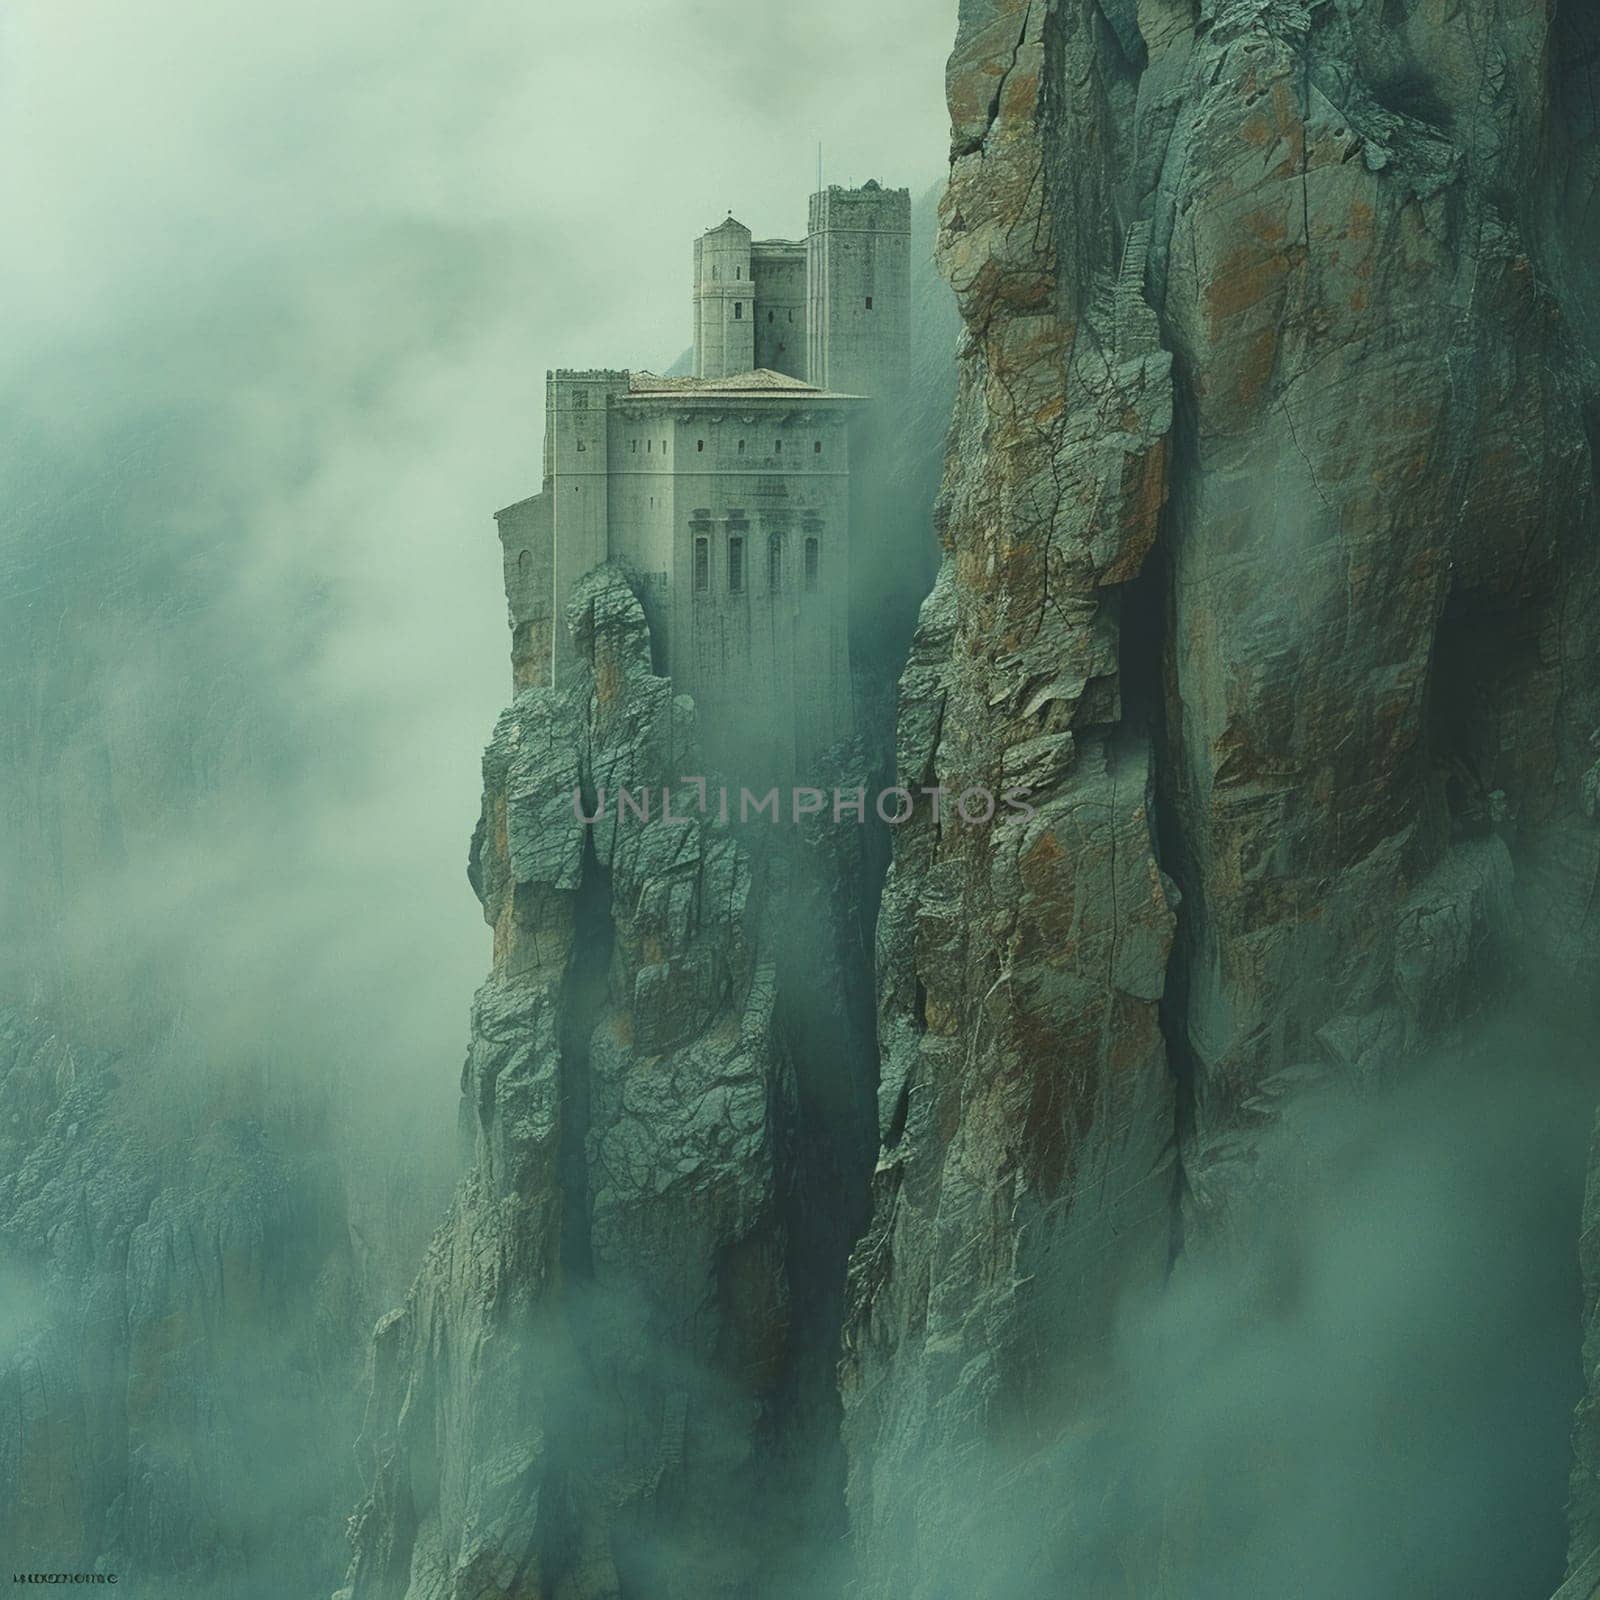 Early Morning Fog Enshrouding a Mountain Monastery, The mist blurs with the stone, a sanctuary perched between heaven and earth.